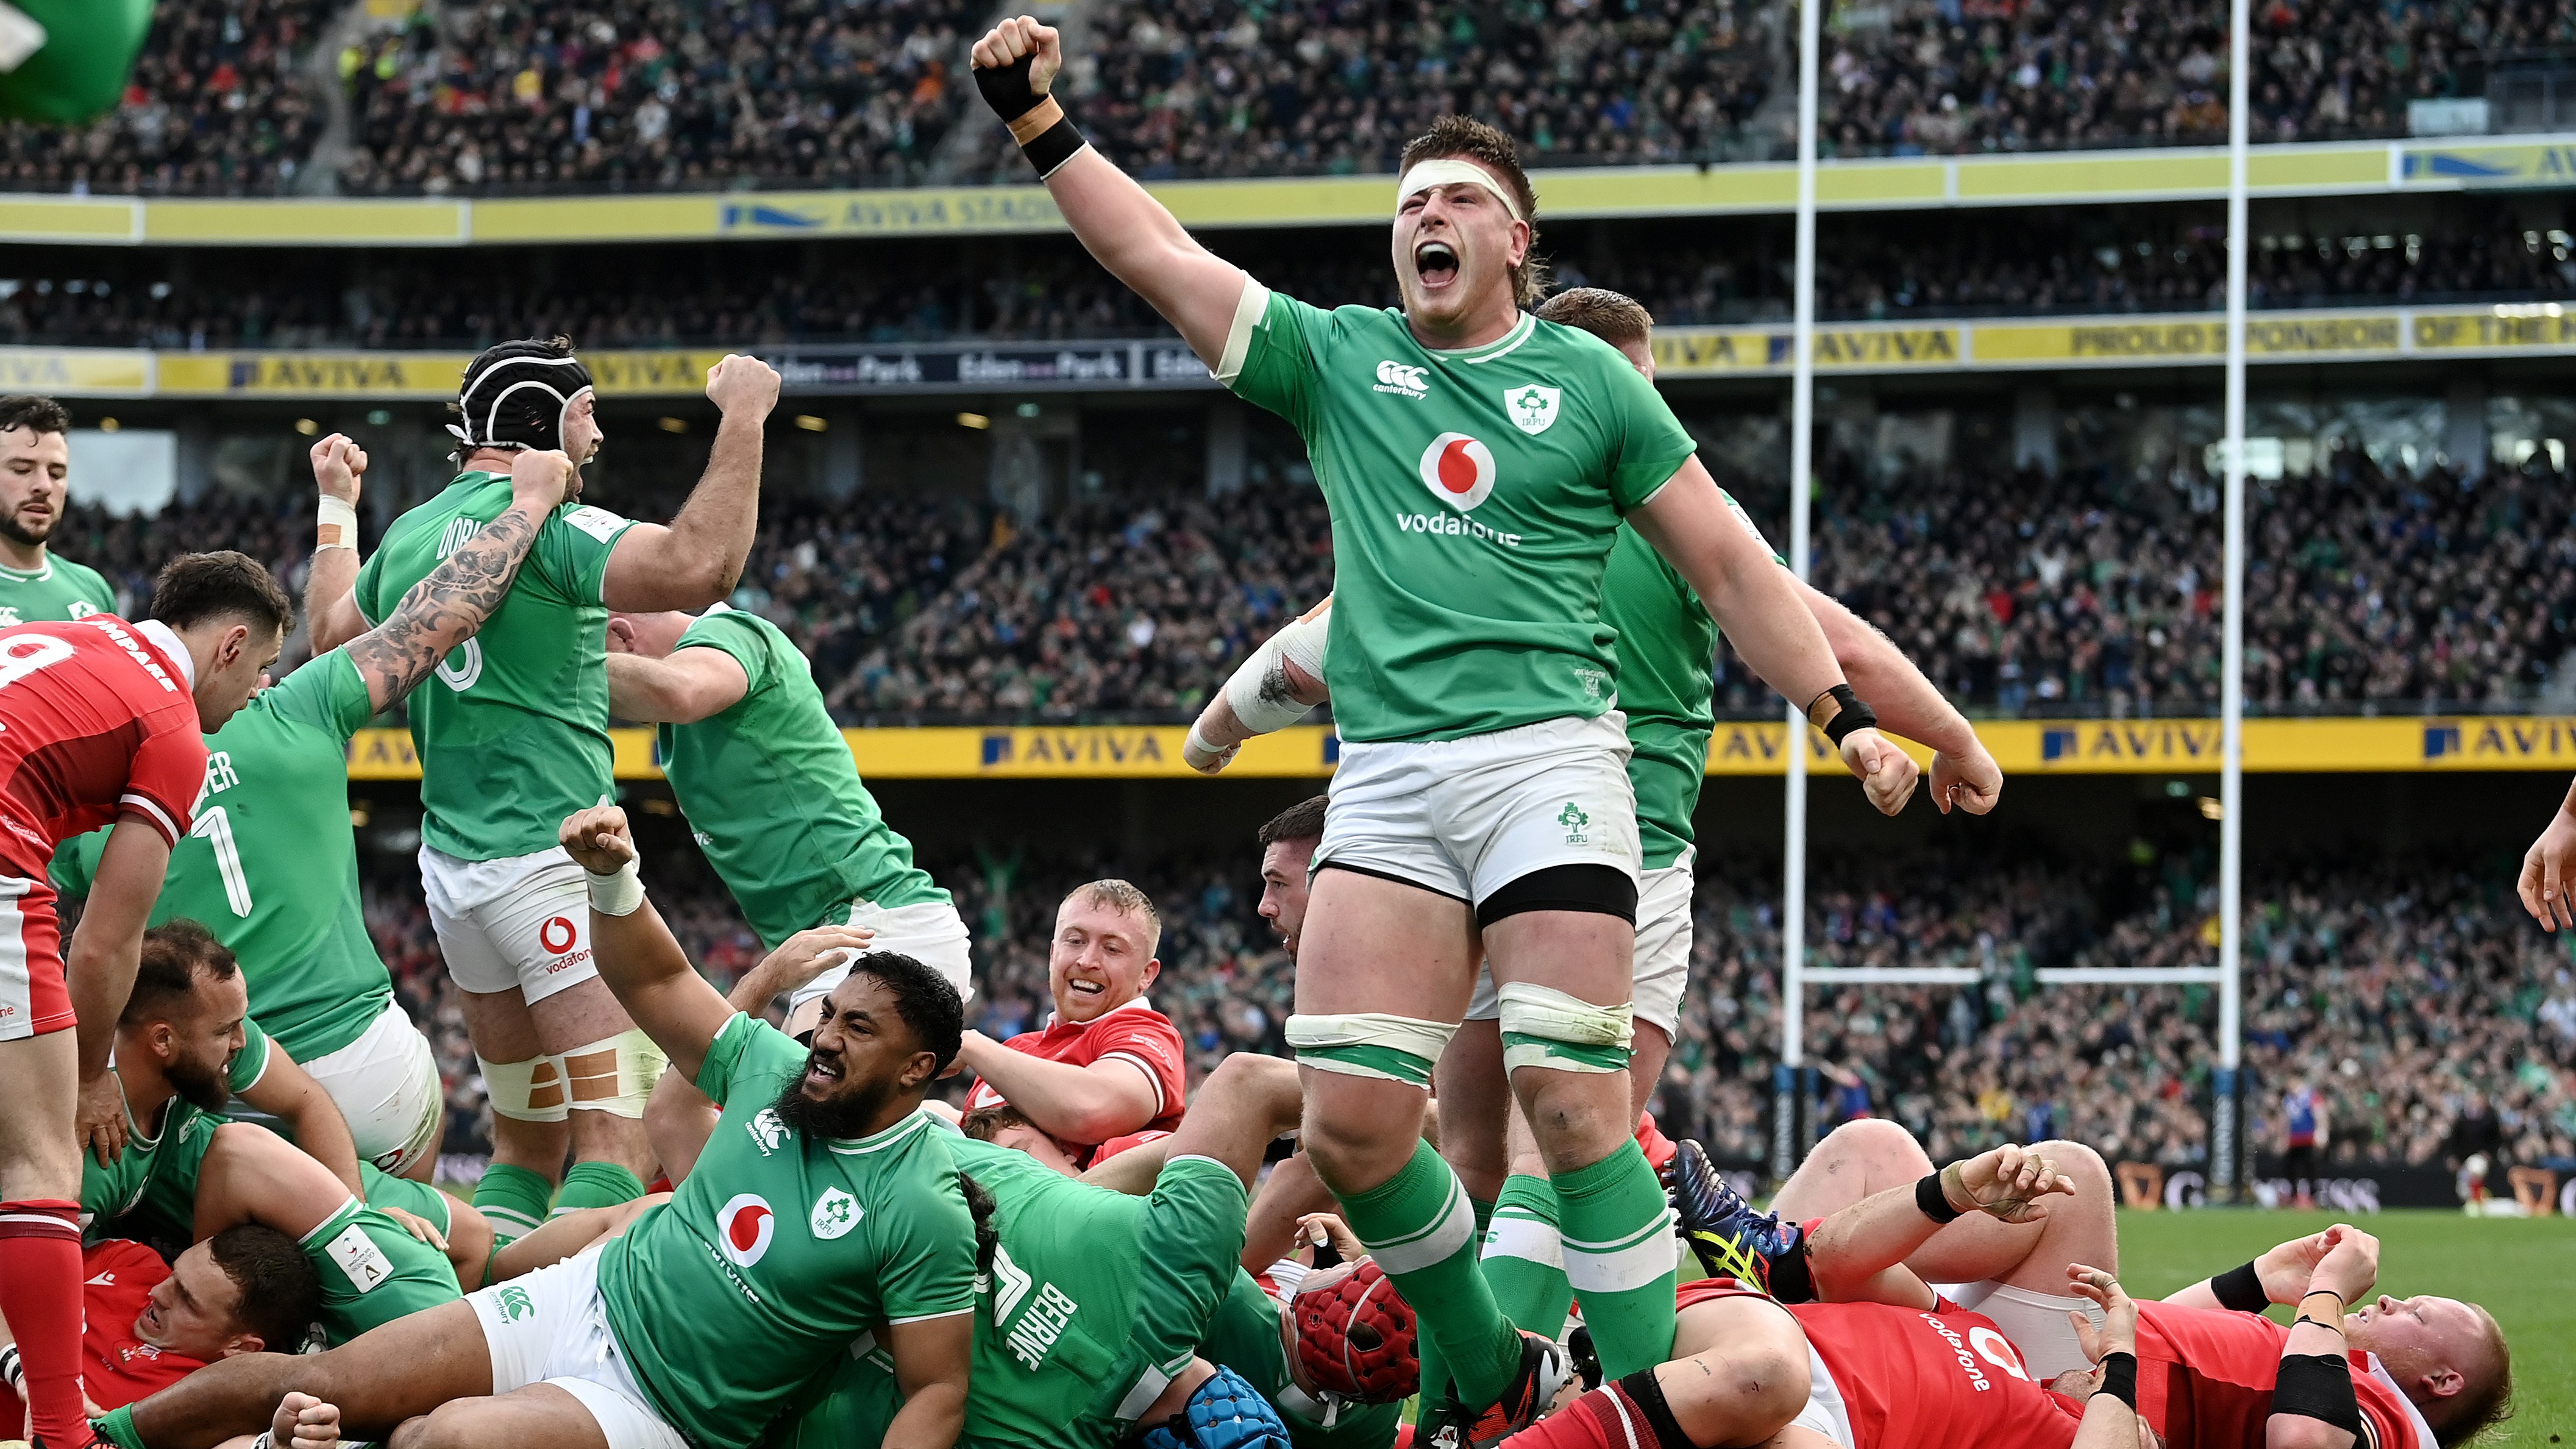 CVC Capital Partners owns a stake in Six Nations Rugby